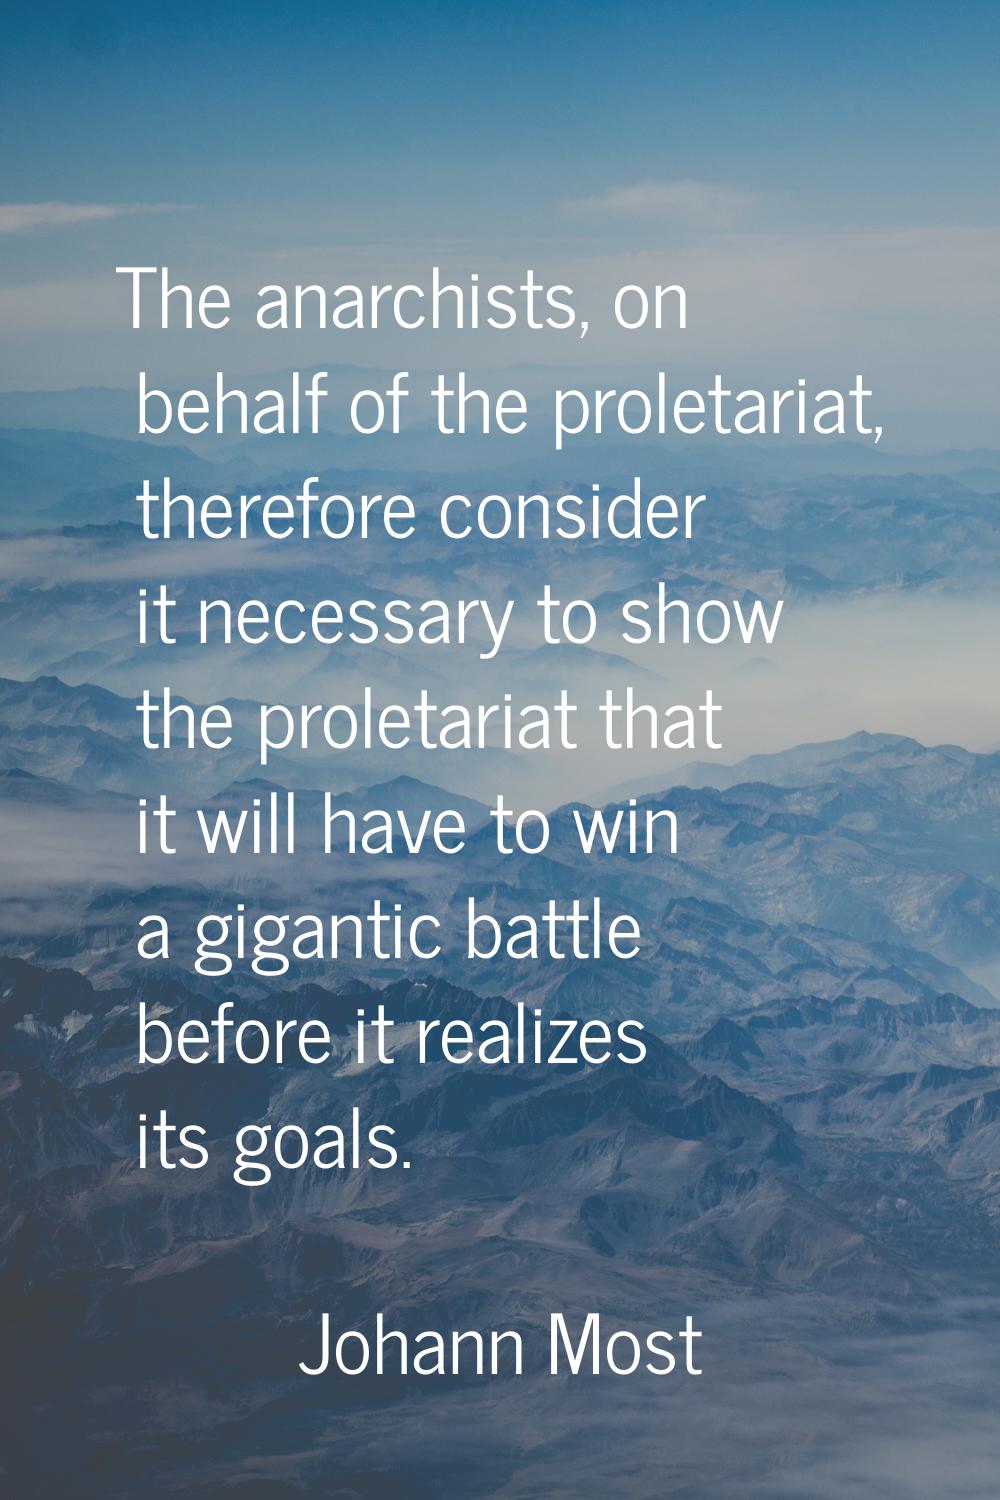 The anarchists, on behalf of the proletariat, therefore consider it necessary to show the proletari